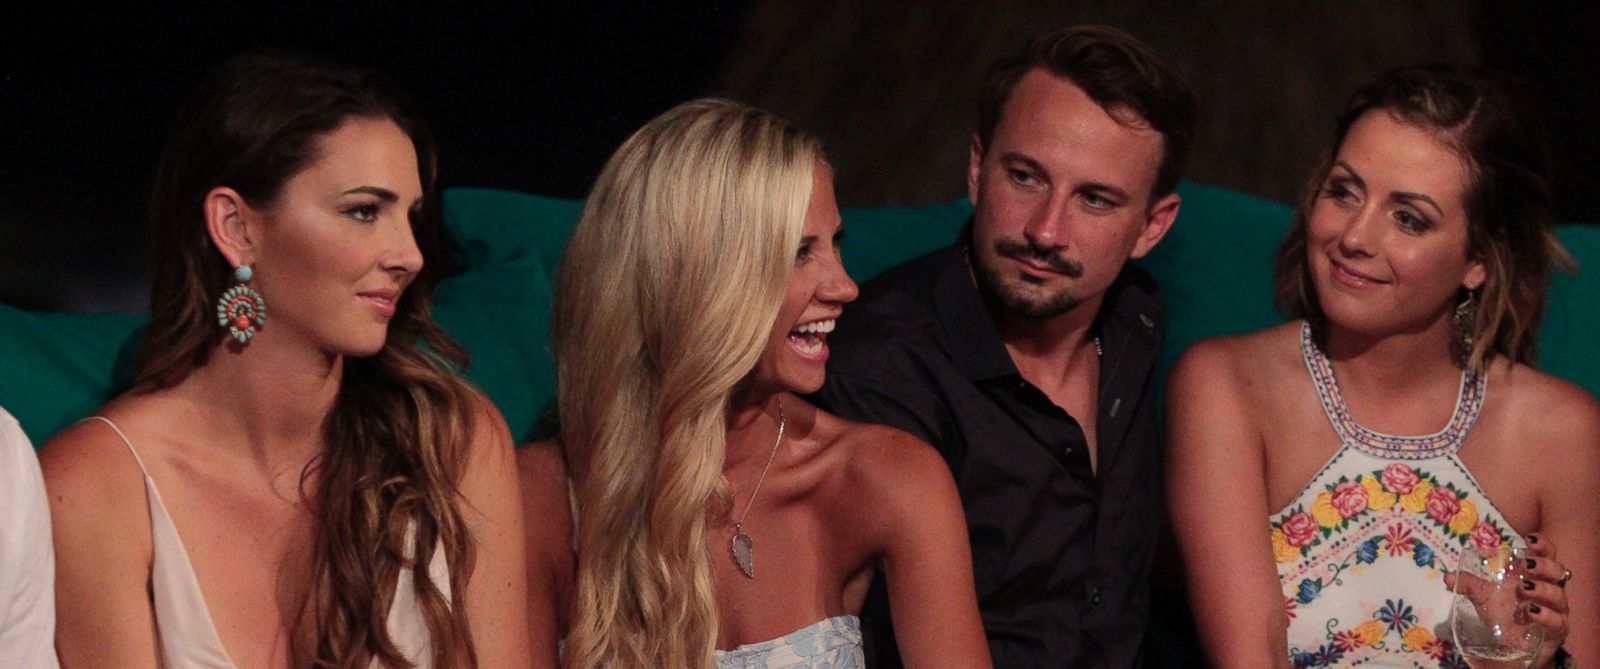 'Bachelor in Paradise': 4 Couples Left Standing - ABC News